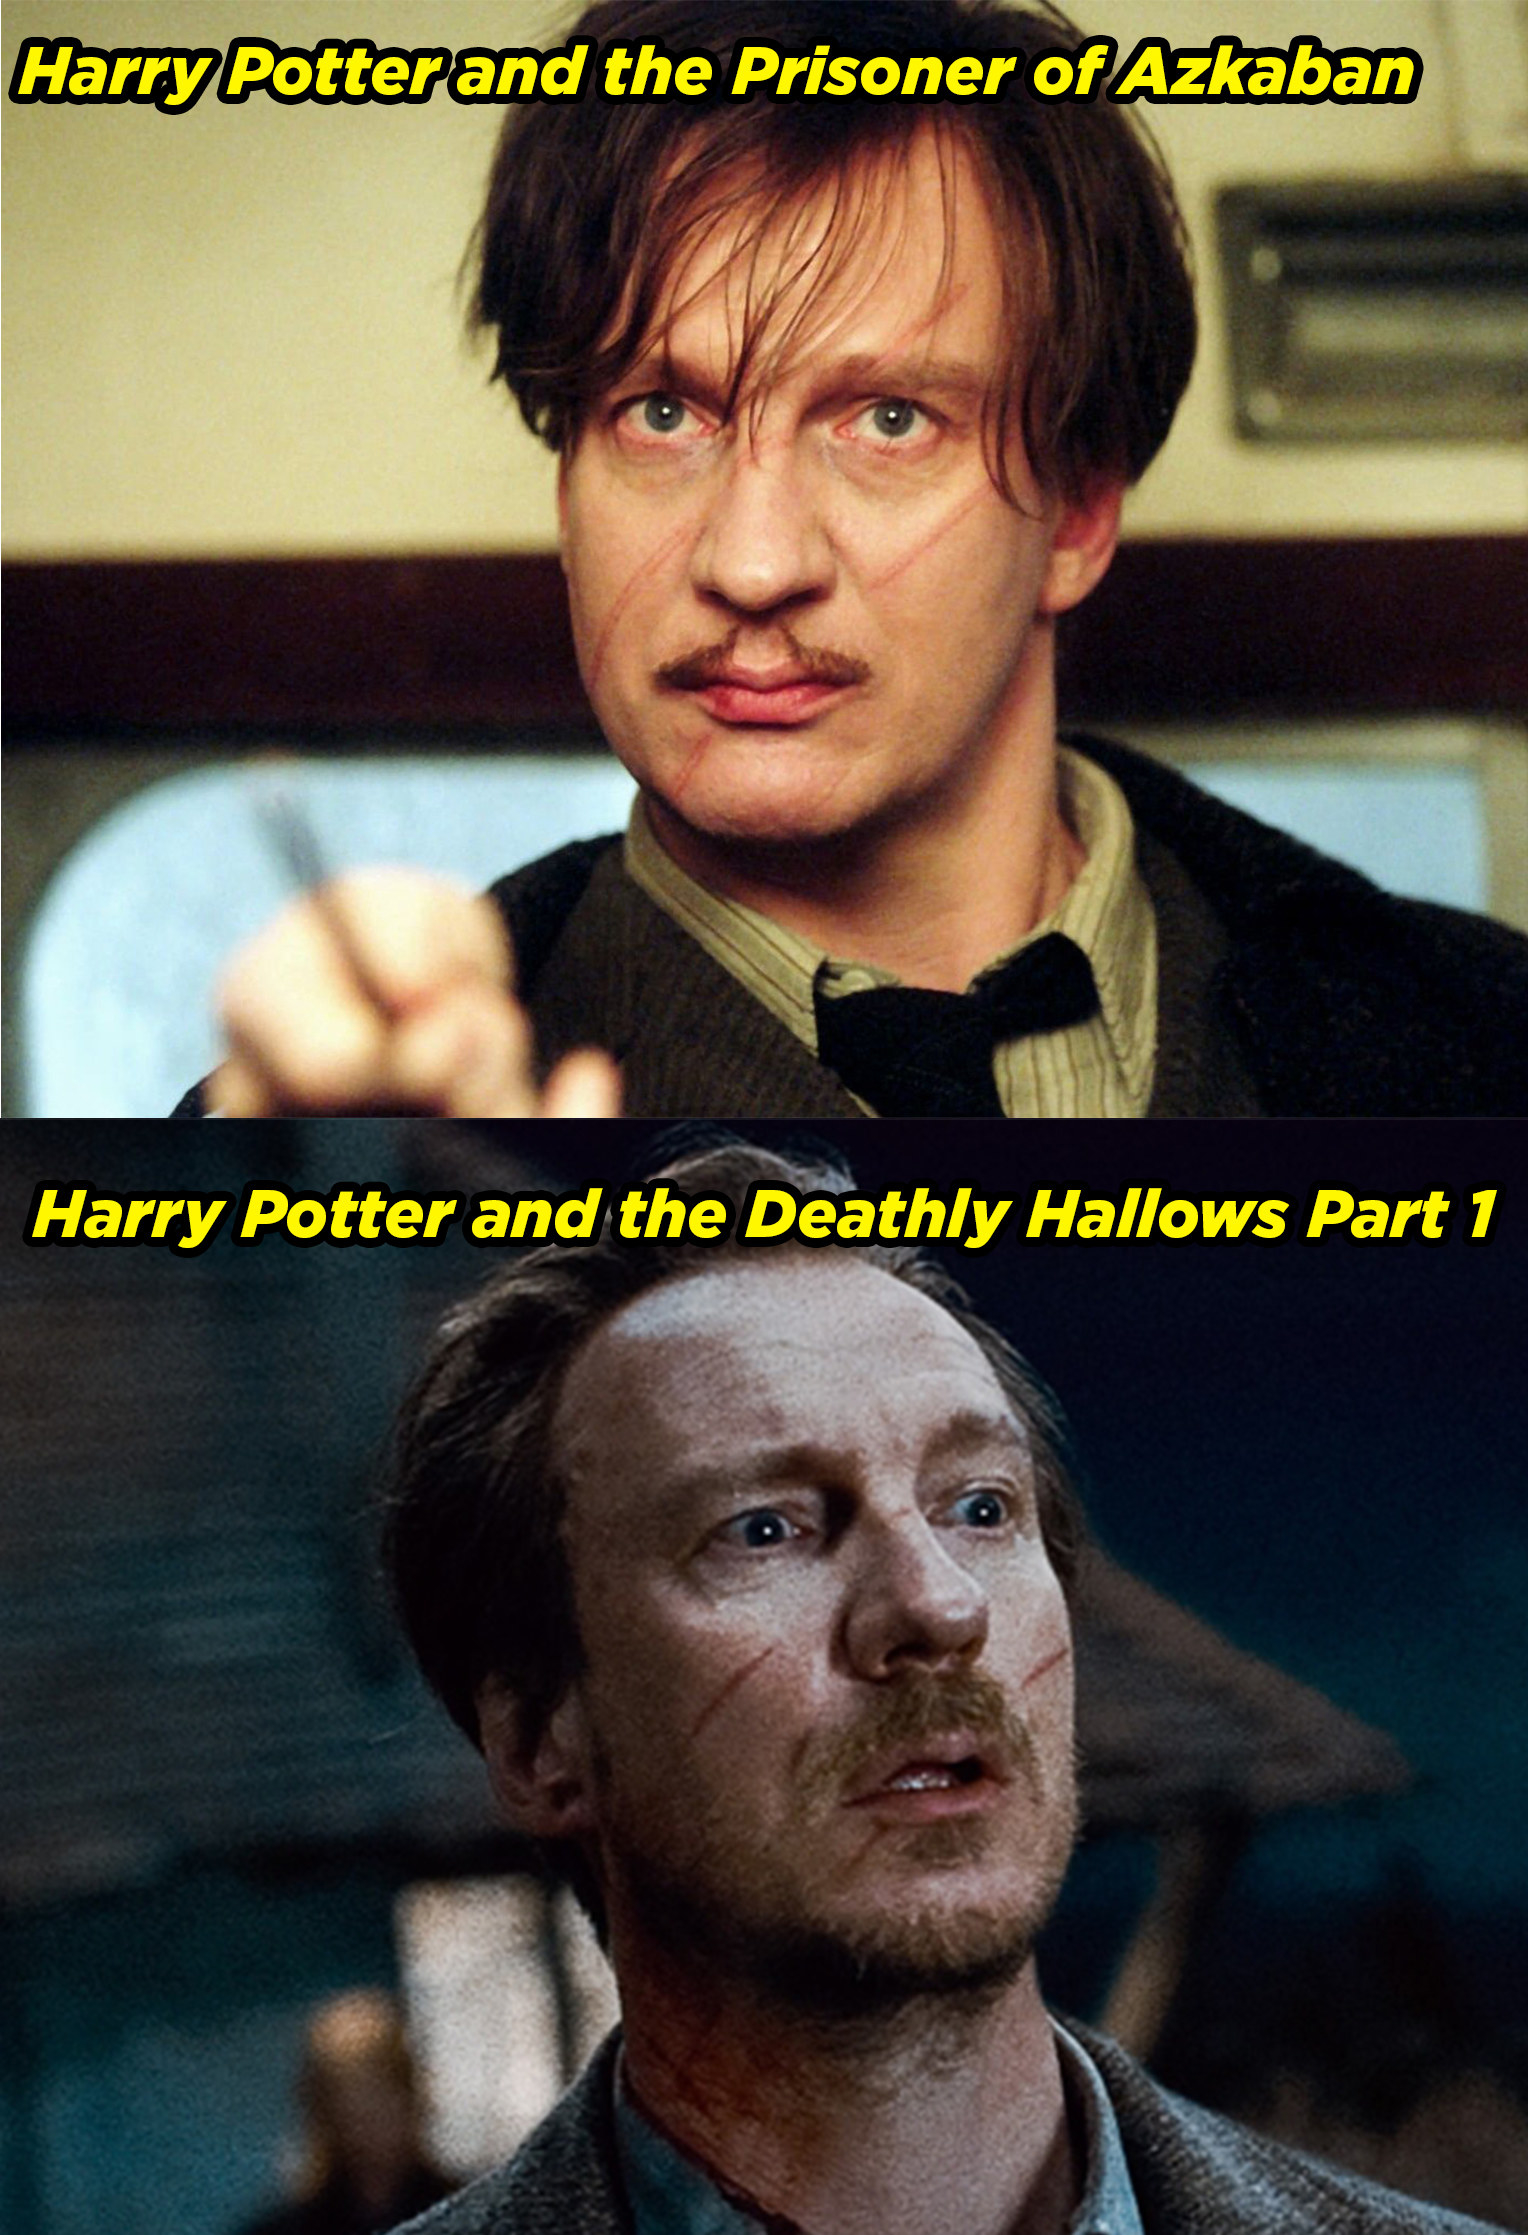 David Thewlis in Prisoner of Azkaban and Deathly Hallows Part 1